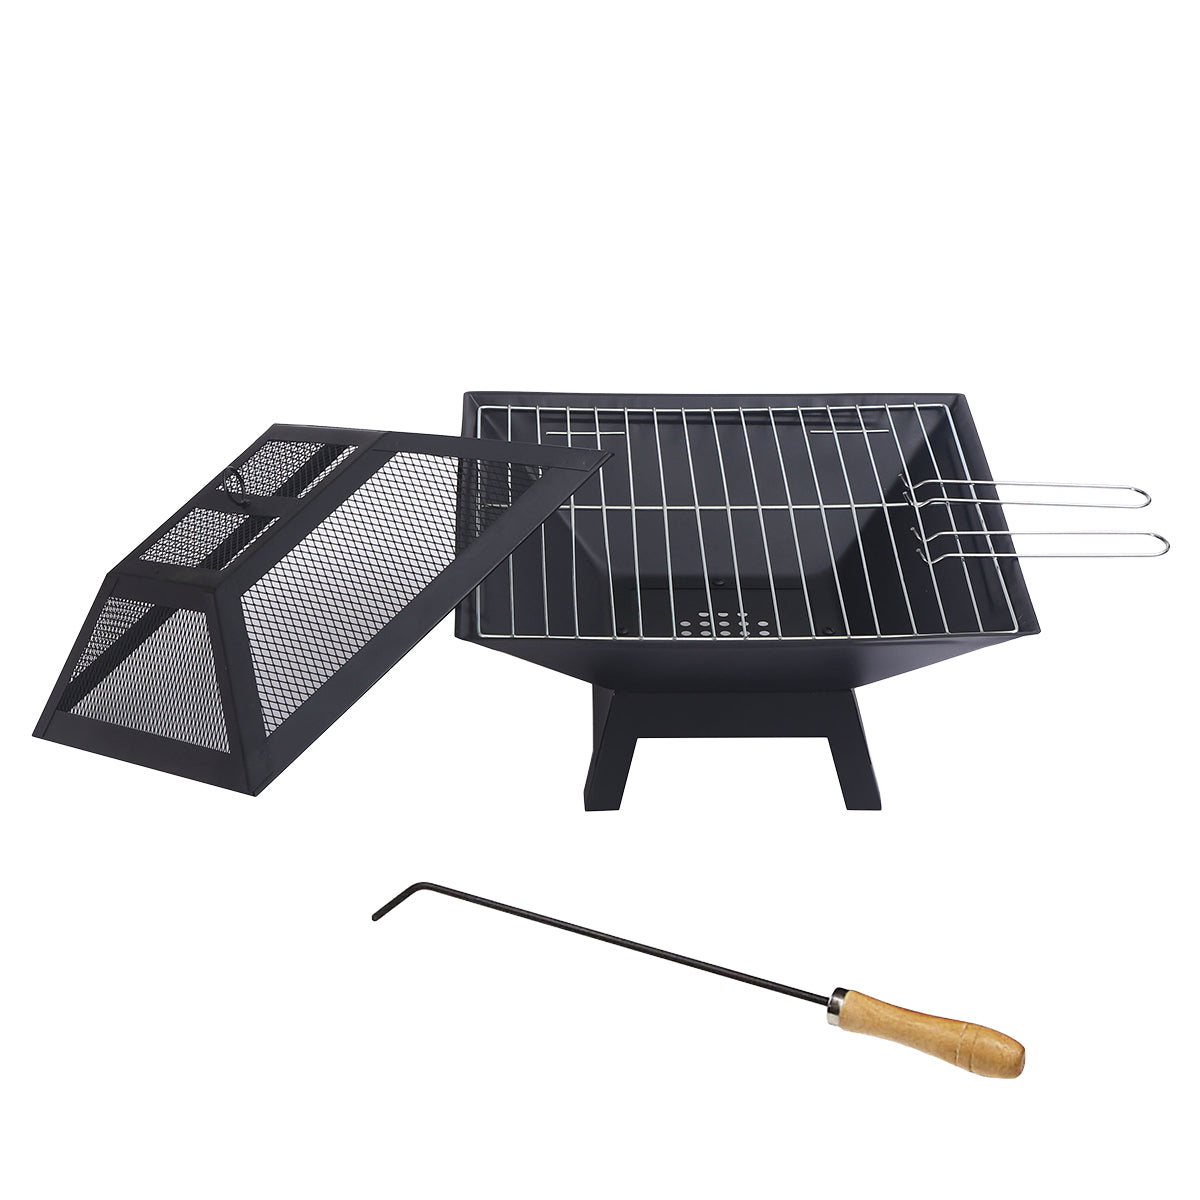 Wallaroo Portable Outdoor Fire Pit for BBQ, Grilling, Cooking, Camping-Home &amp; Garden &gt; BBQ-PEROZ Accessories